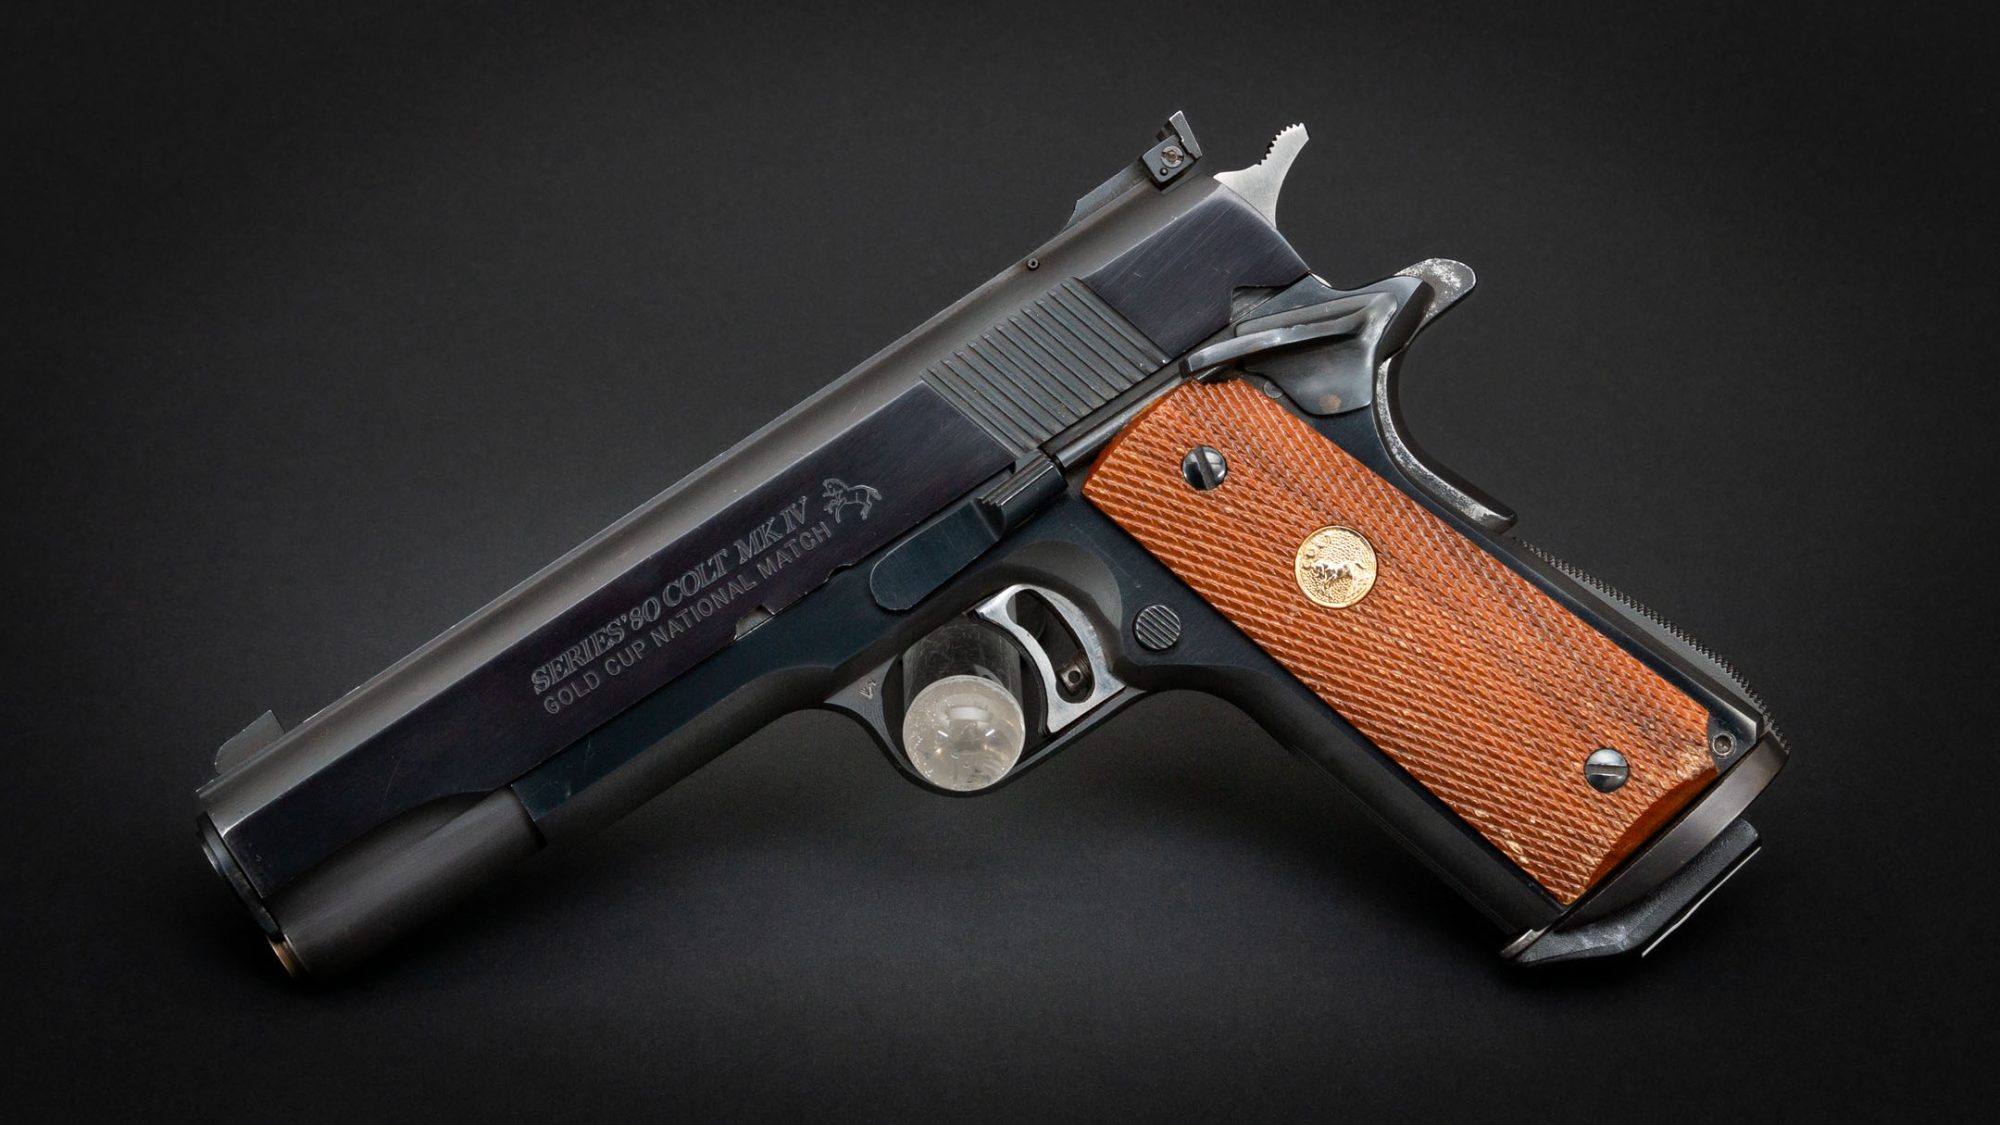 Colt M1911 Series 80 Mark IV Gold Cup National Match in .45 ACP, for sale by Turnbull Restoration Co. of Bloomfield, NY